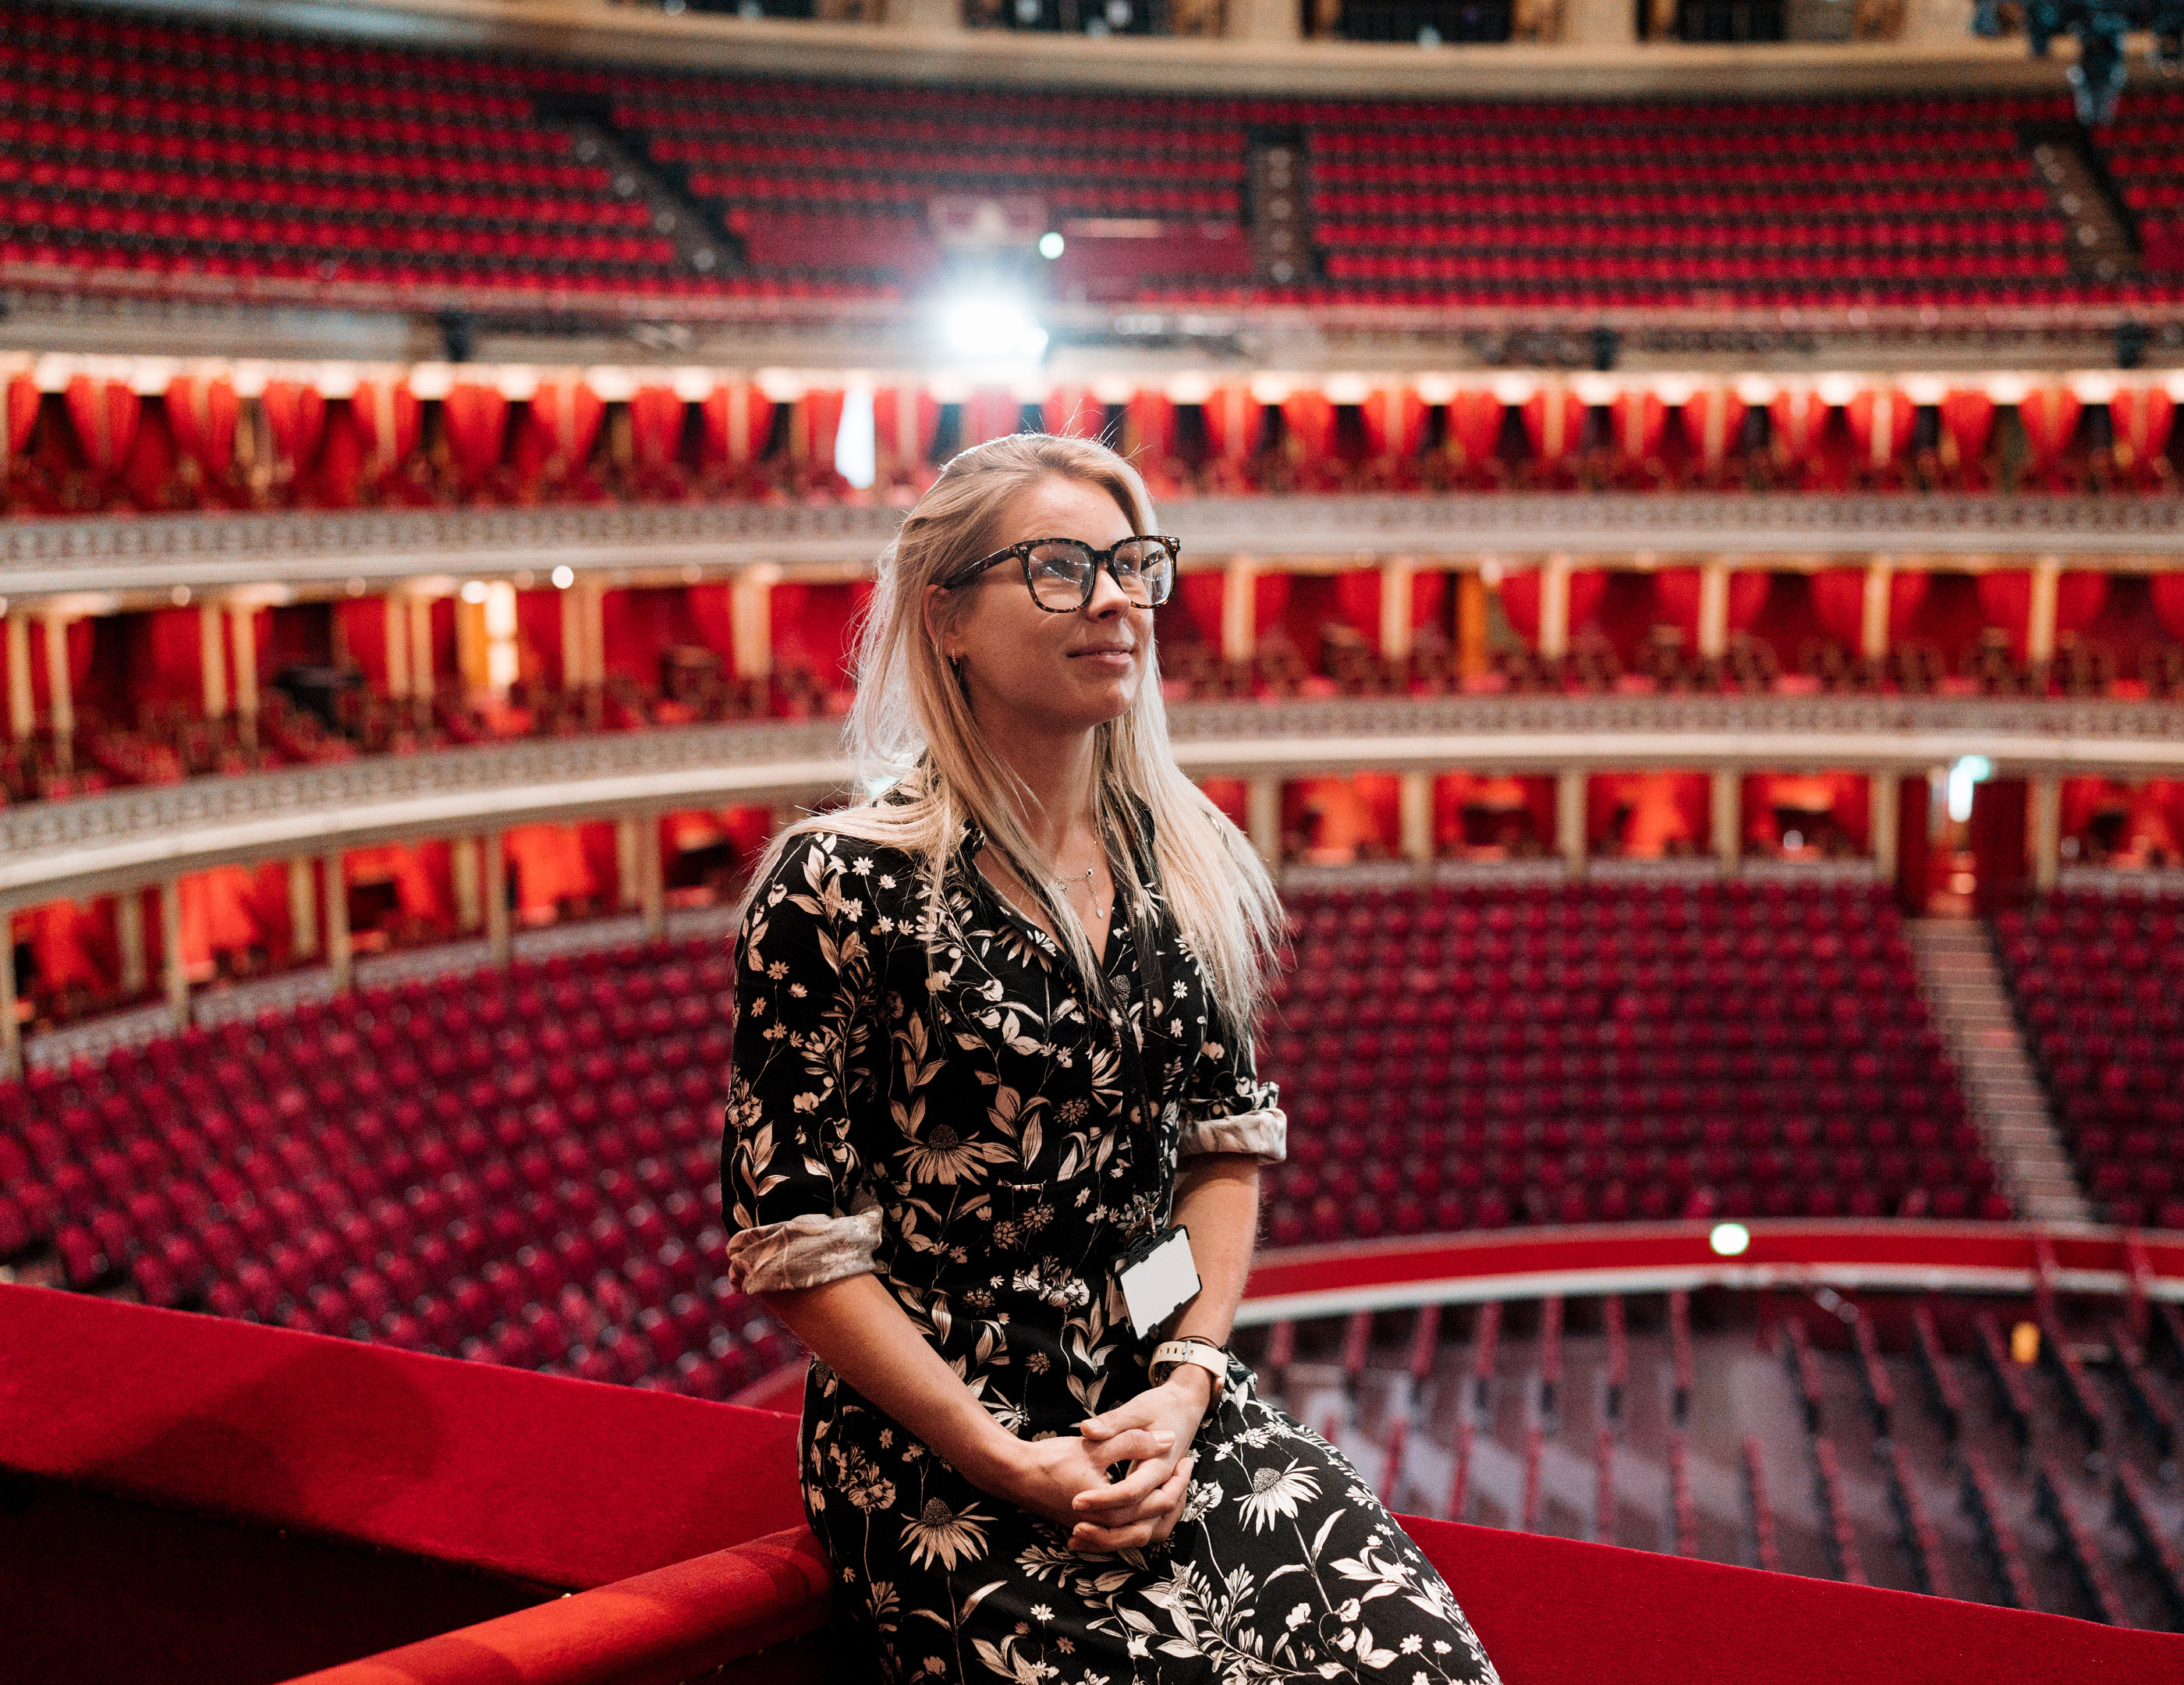 Woman sat on red ledge with backdrop of theatre seats 